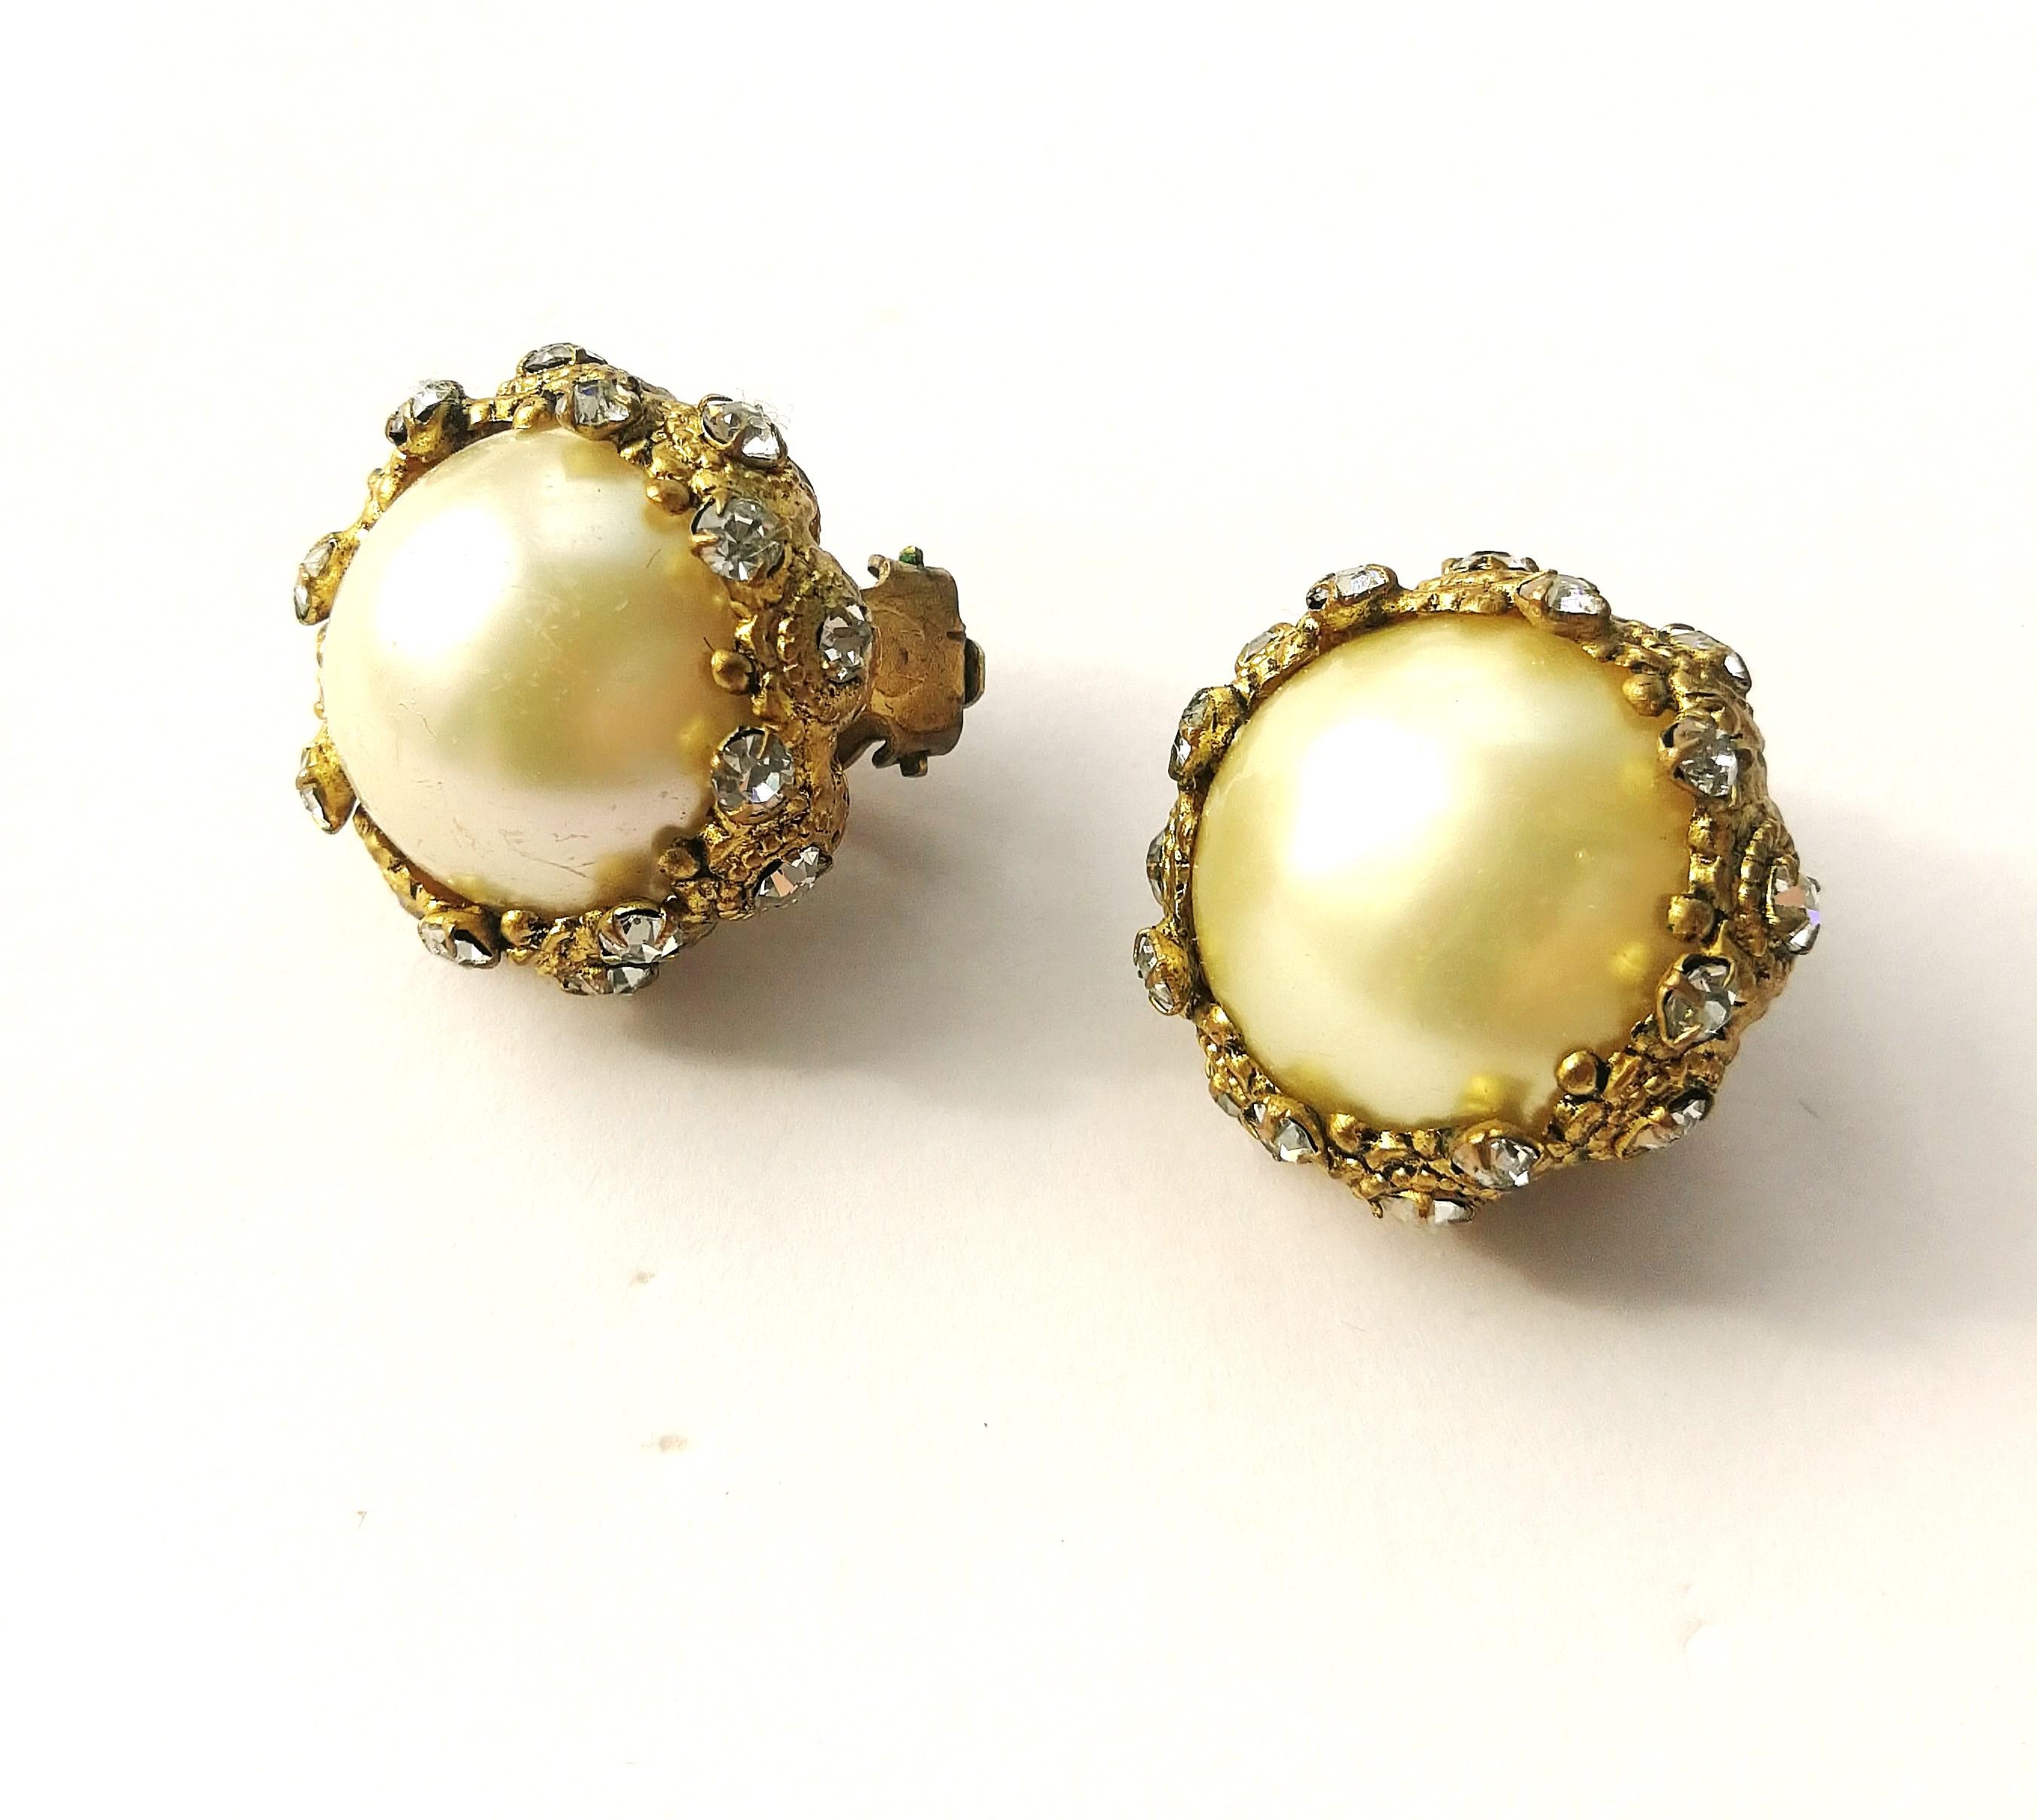 These highly classic and highly wearable pearl earrings from Chanel, made by Maison Goossens in the 1950s, offer the wearer the best of the original Chanel vintage style, handmade by artisans in Paris, and experience the unique and iconic Parisian